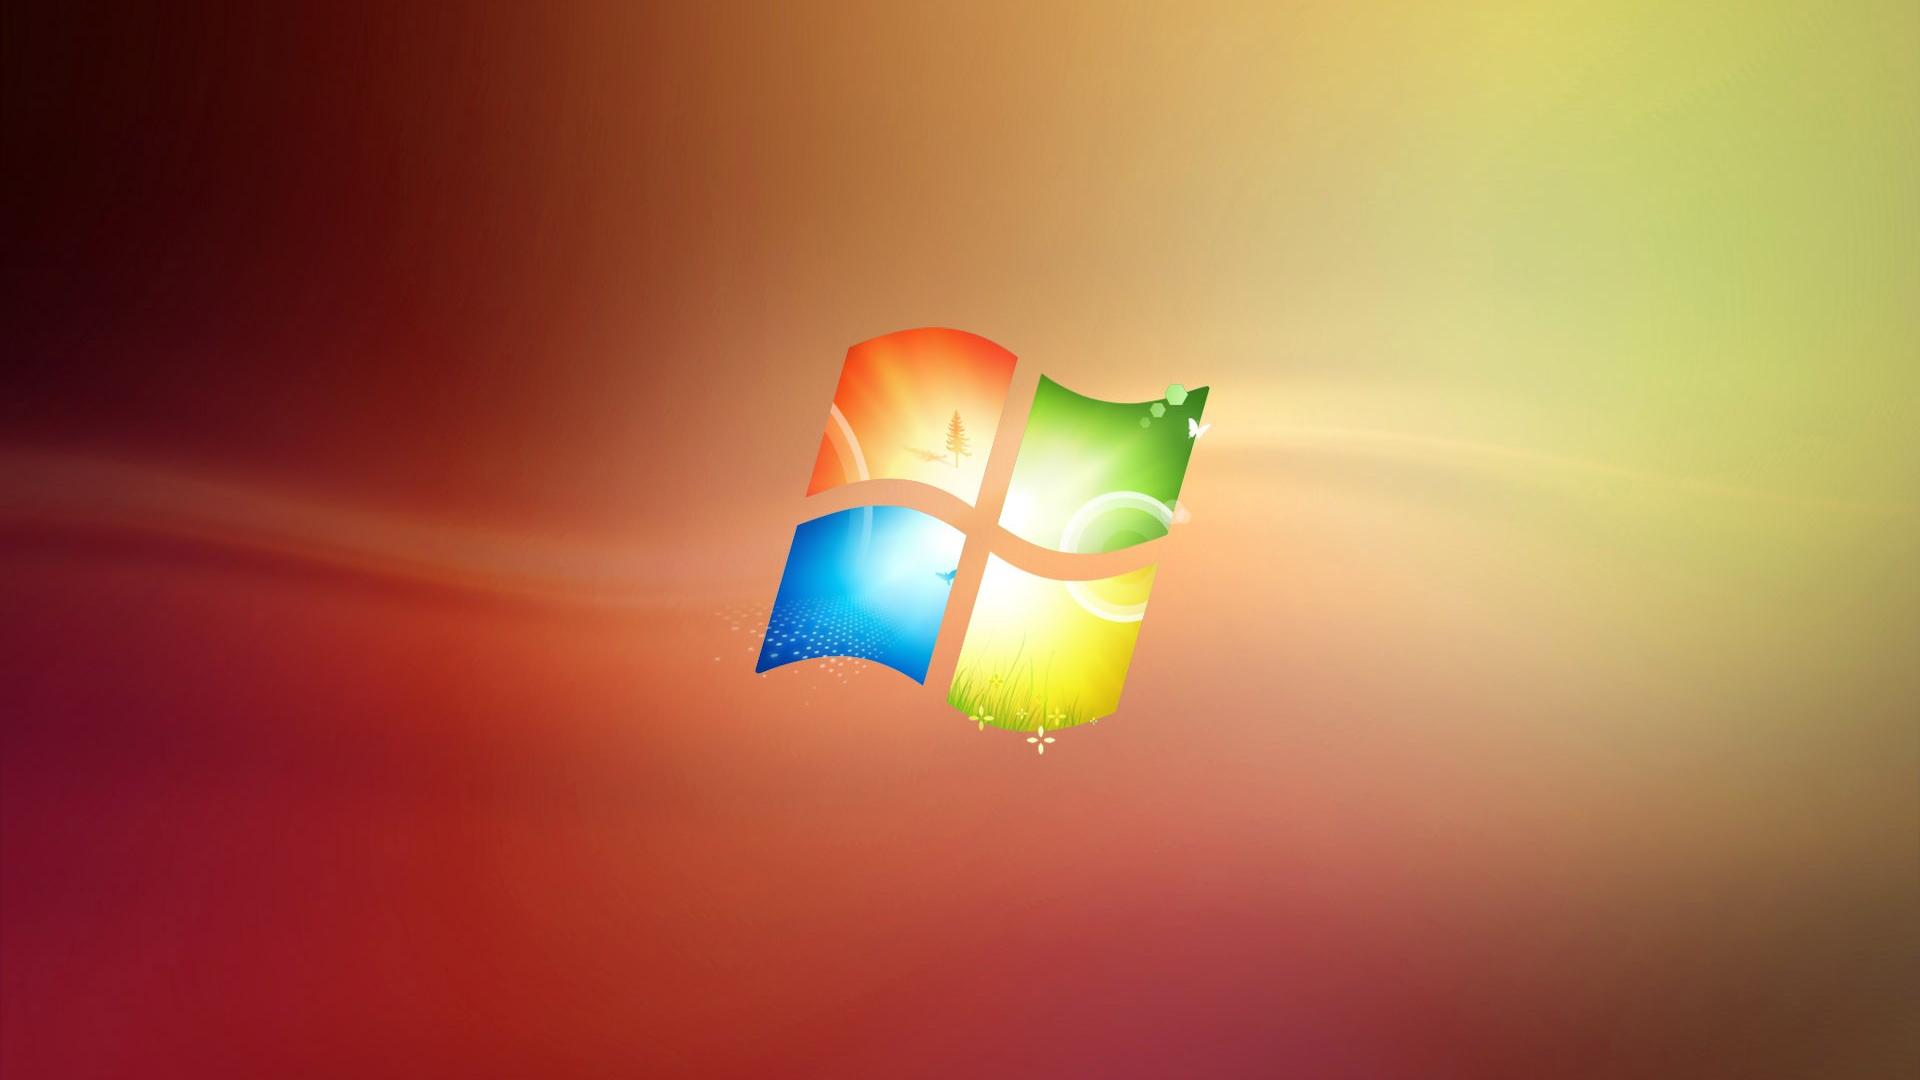 1920x1080 Cool Windows 7 System Colorful Backgrounds